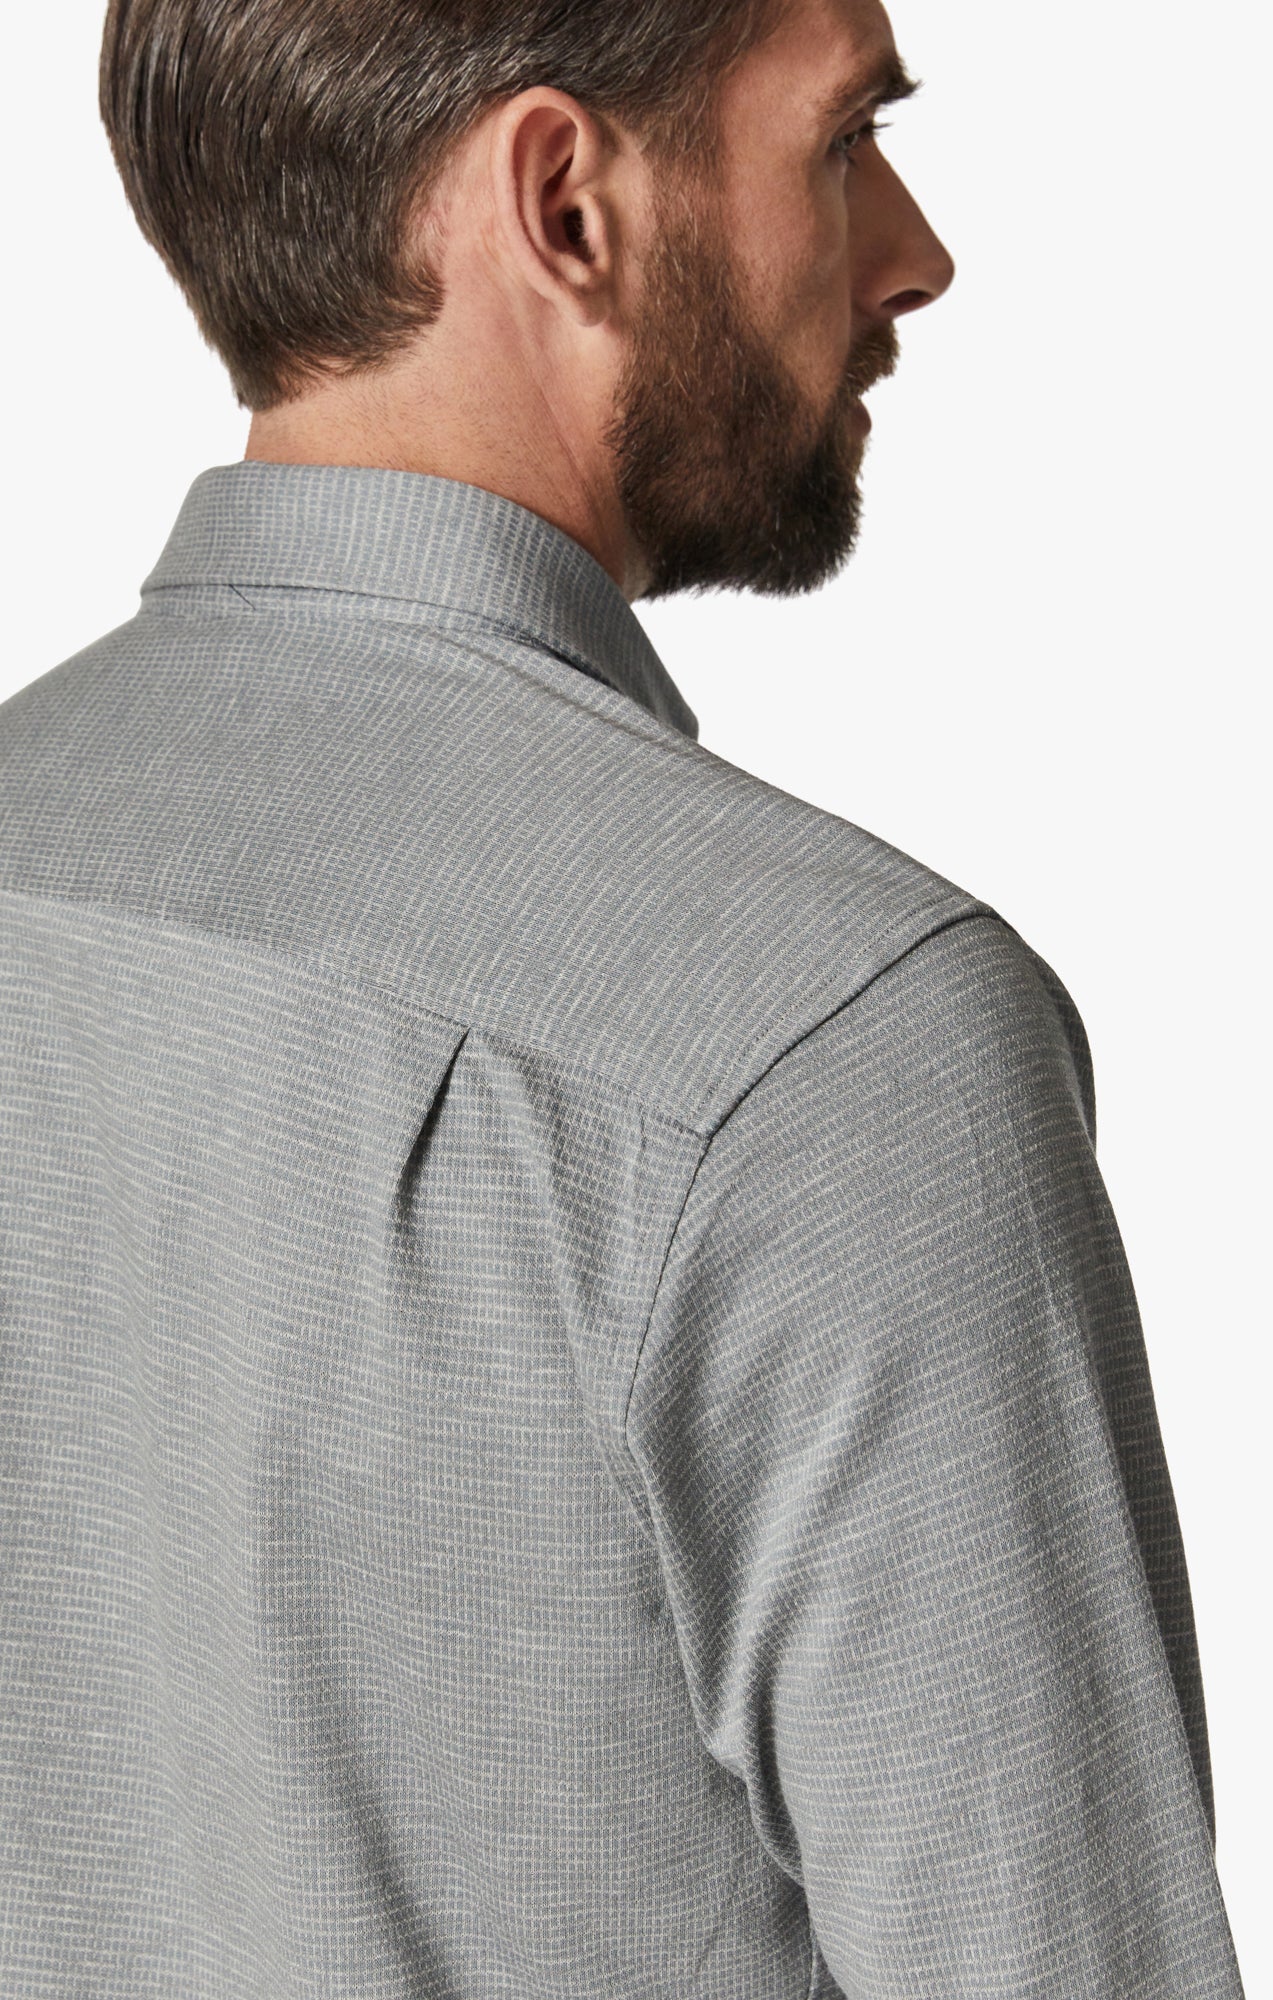 Structured Shirt In Light Grey Image 7